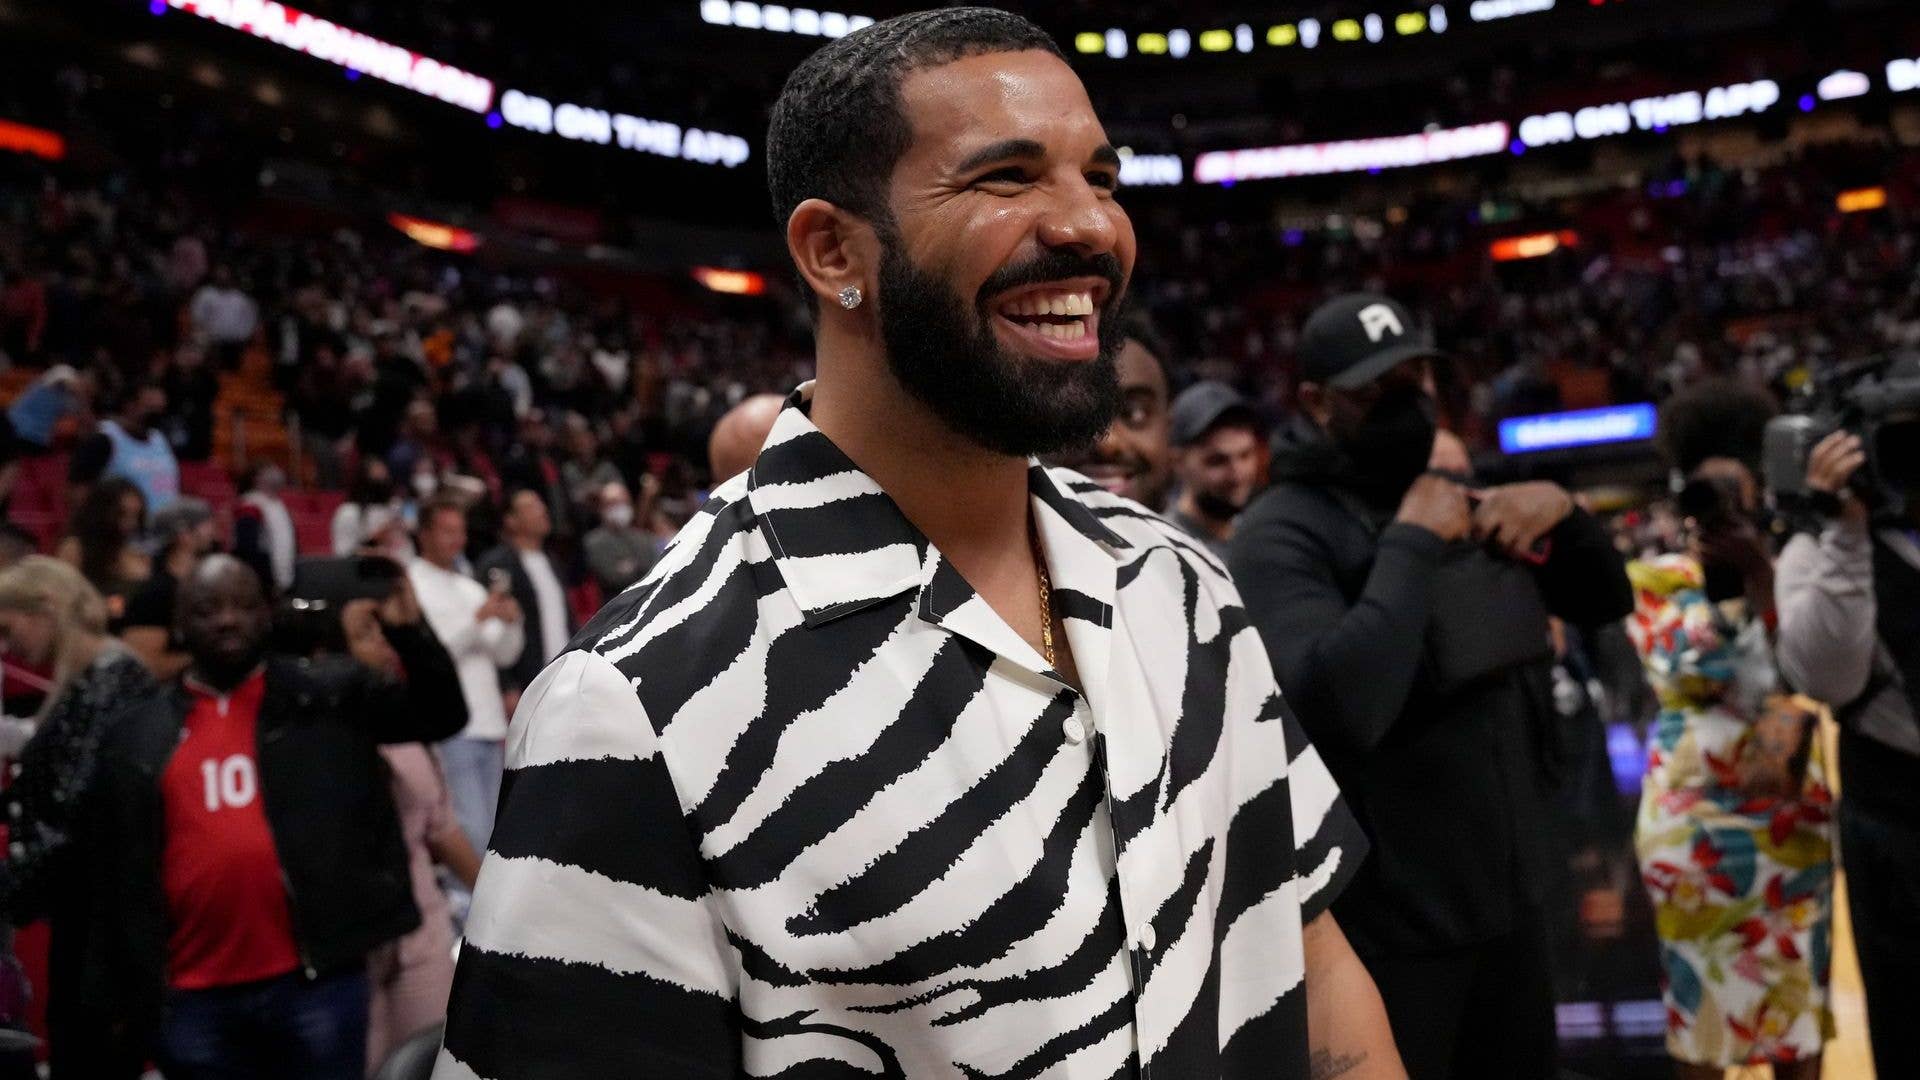 Drake reacts after attending the game between the Miami Heat and the Atlanta Hawks